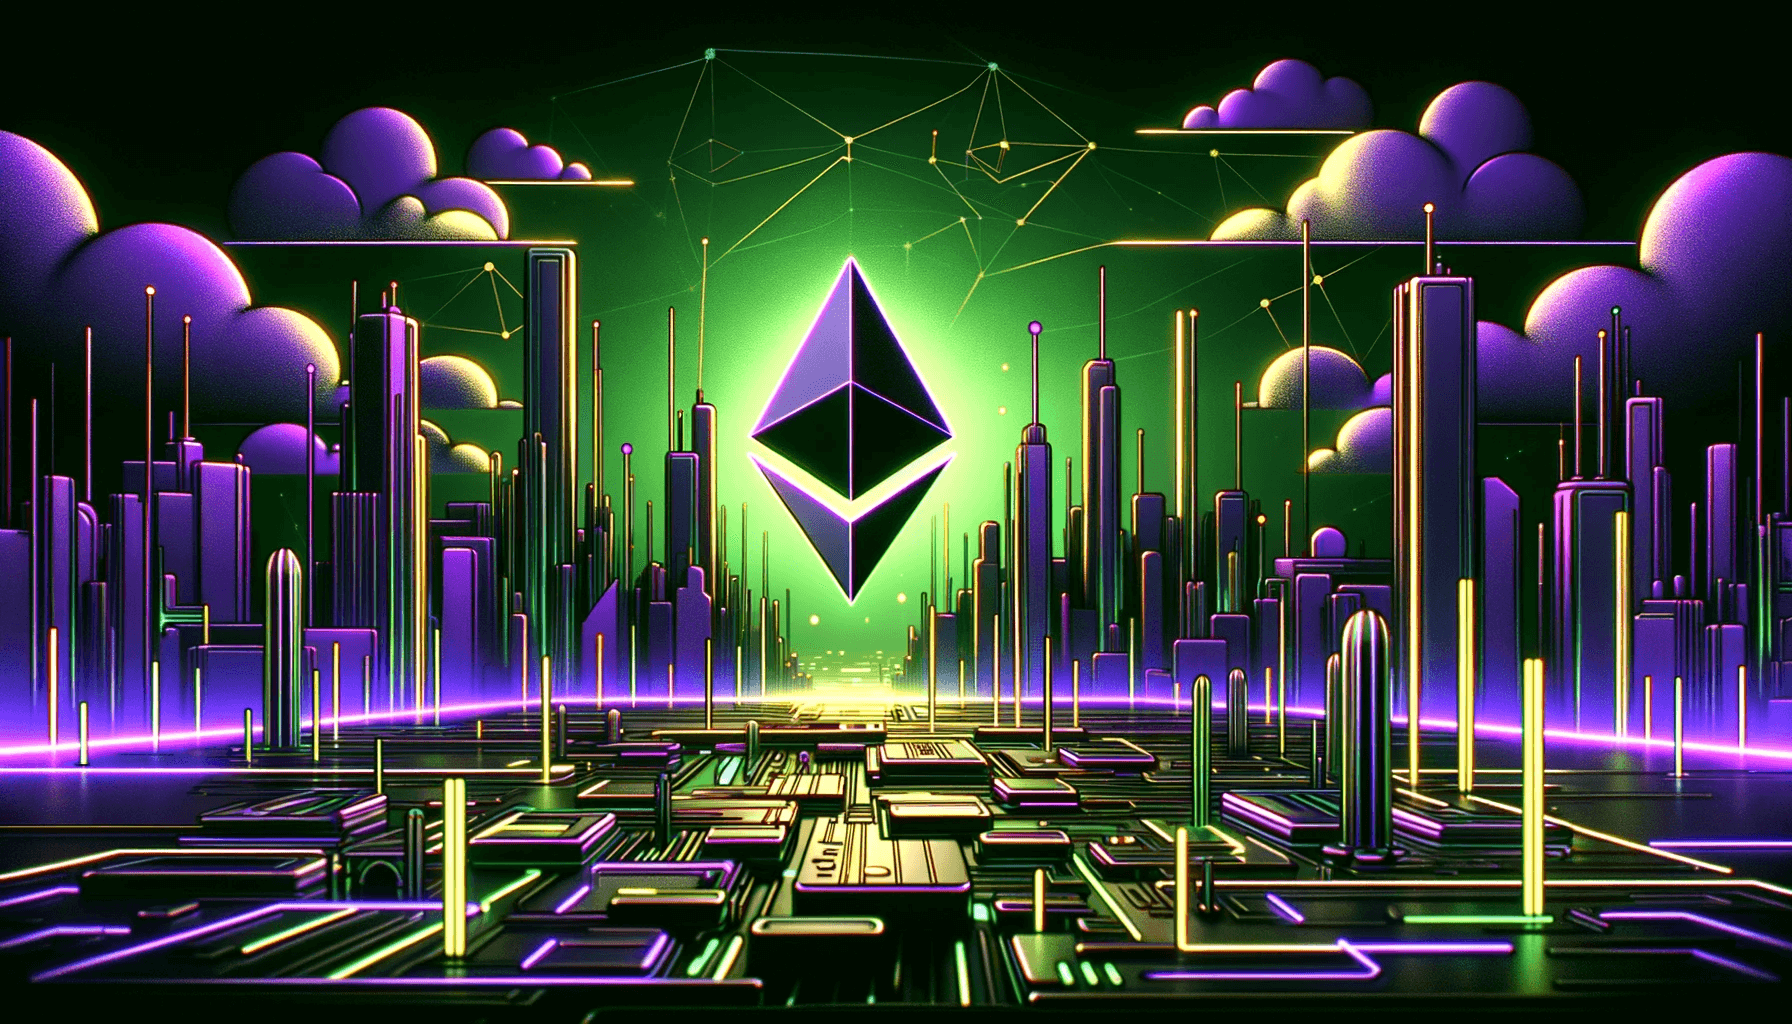 Ethereum Price Prediction 2050 - A Look Into the Future